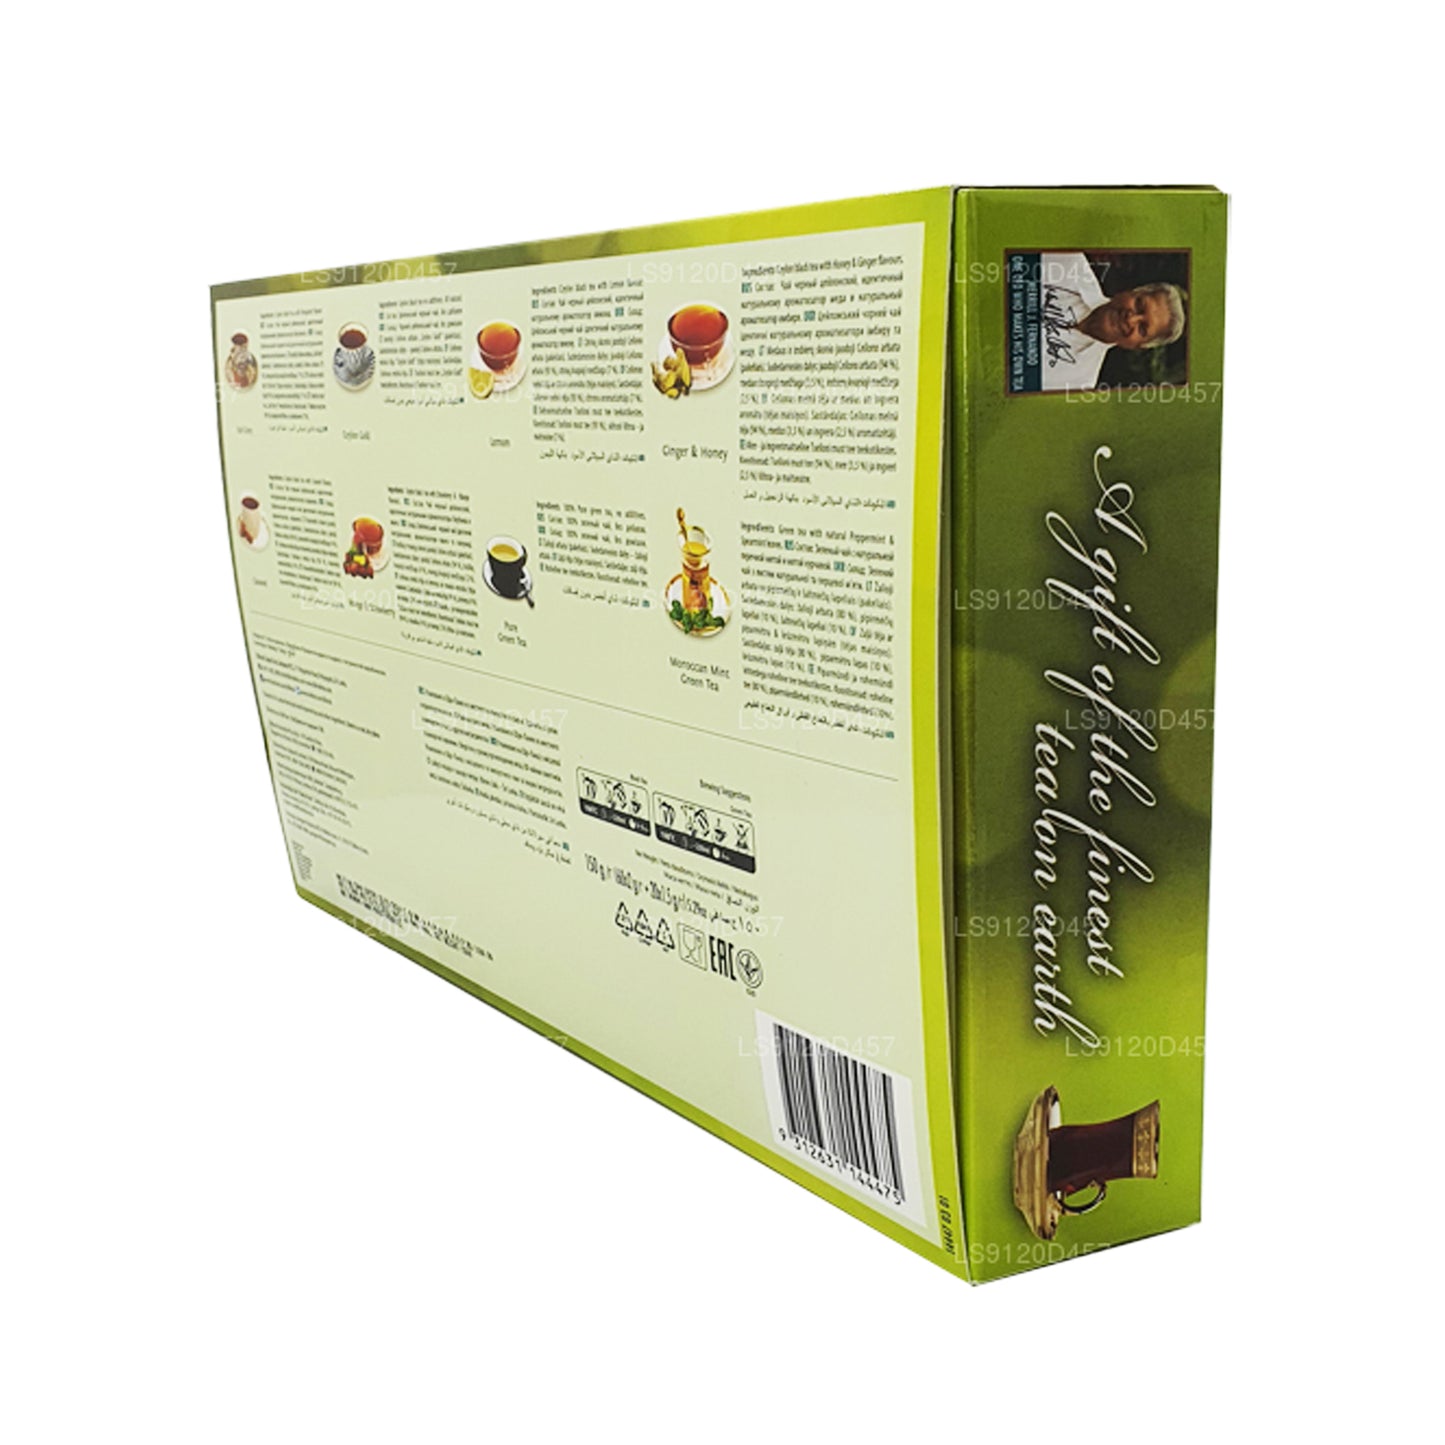 Dilmah A gift of the finest tea on earth (150g) 80 Tea Bags